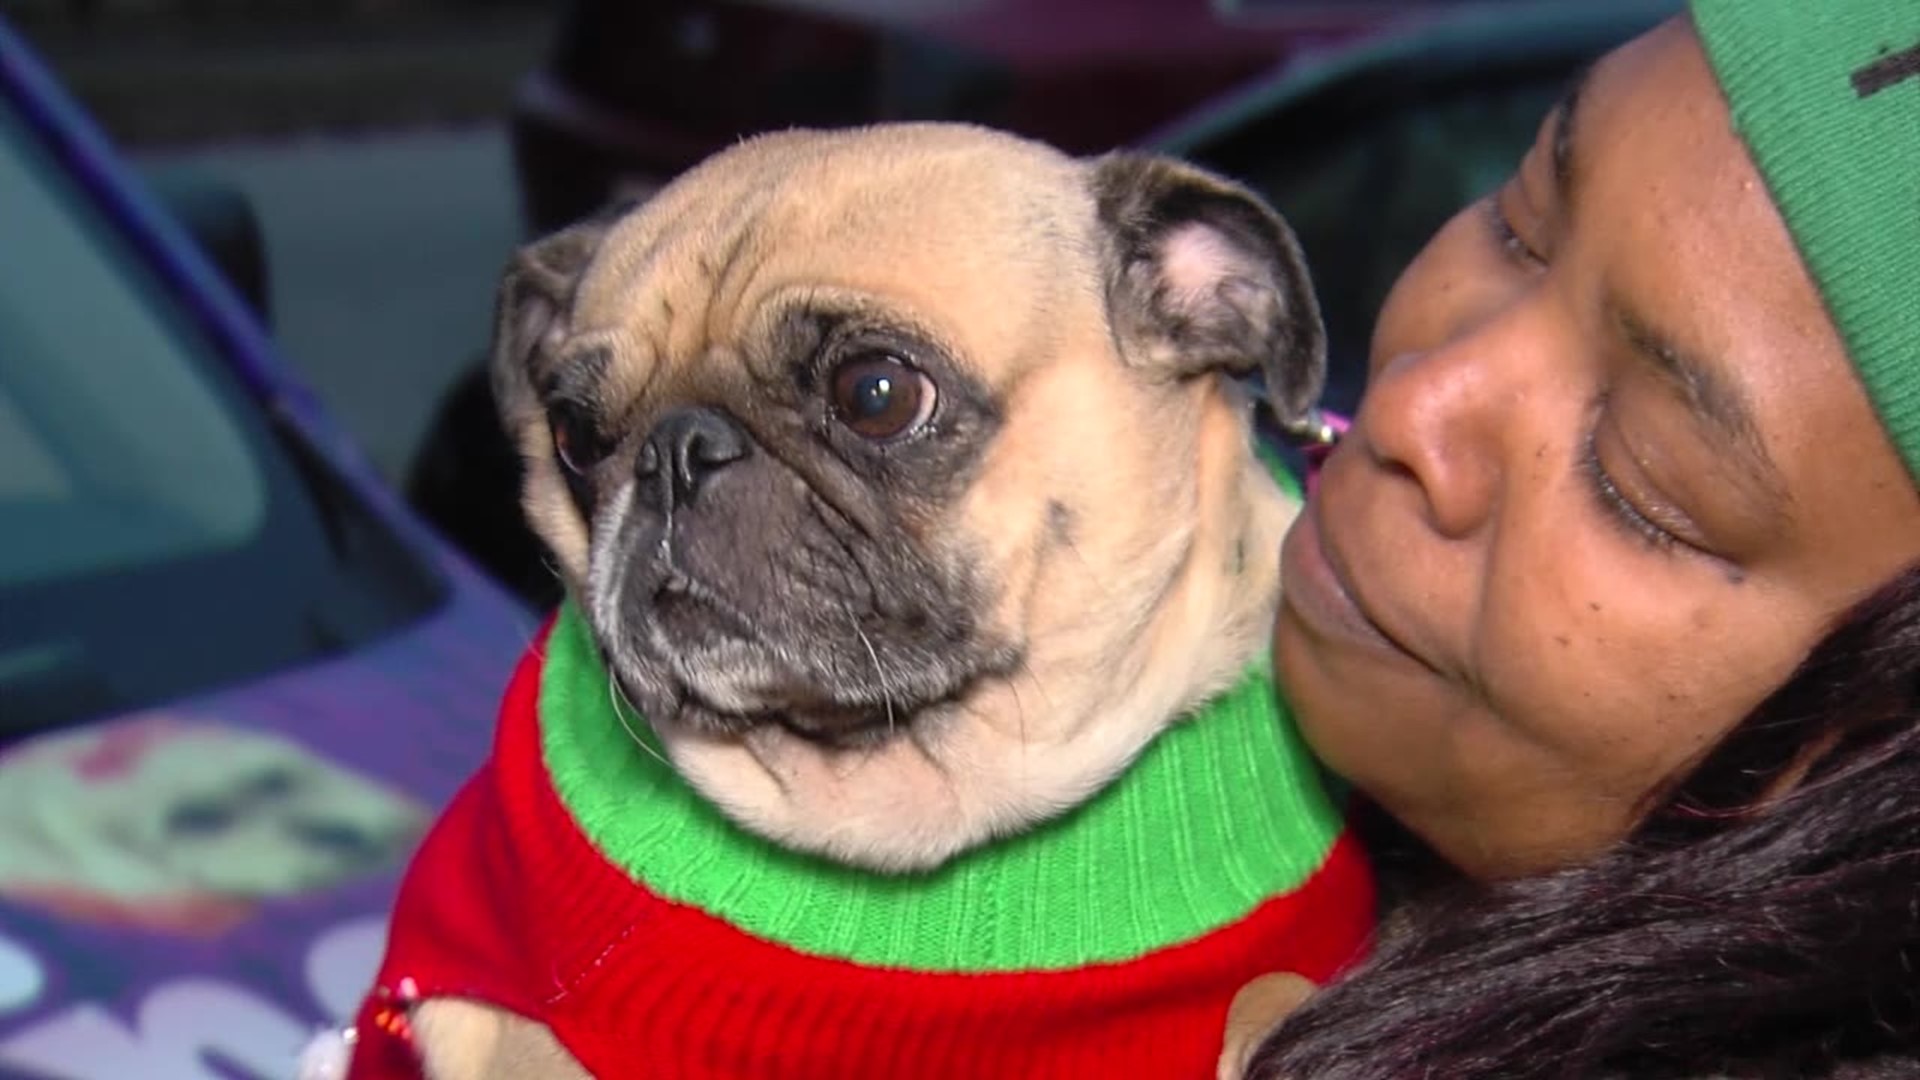 After a Grinch steals her dog right before Christmas, Memphis woman reunited with her beloved pug named Pug